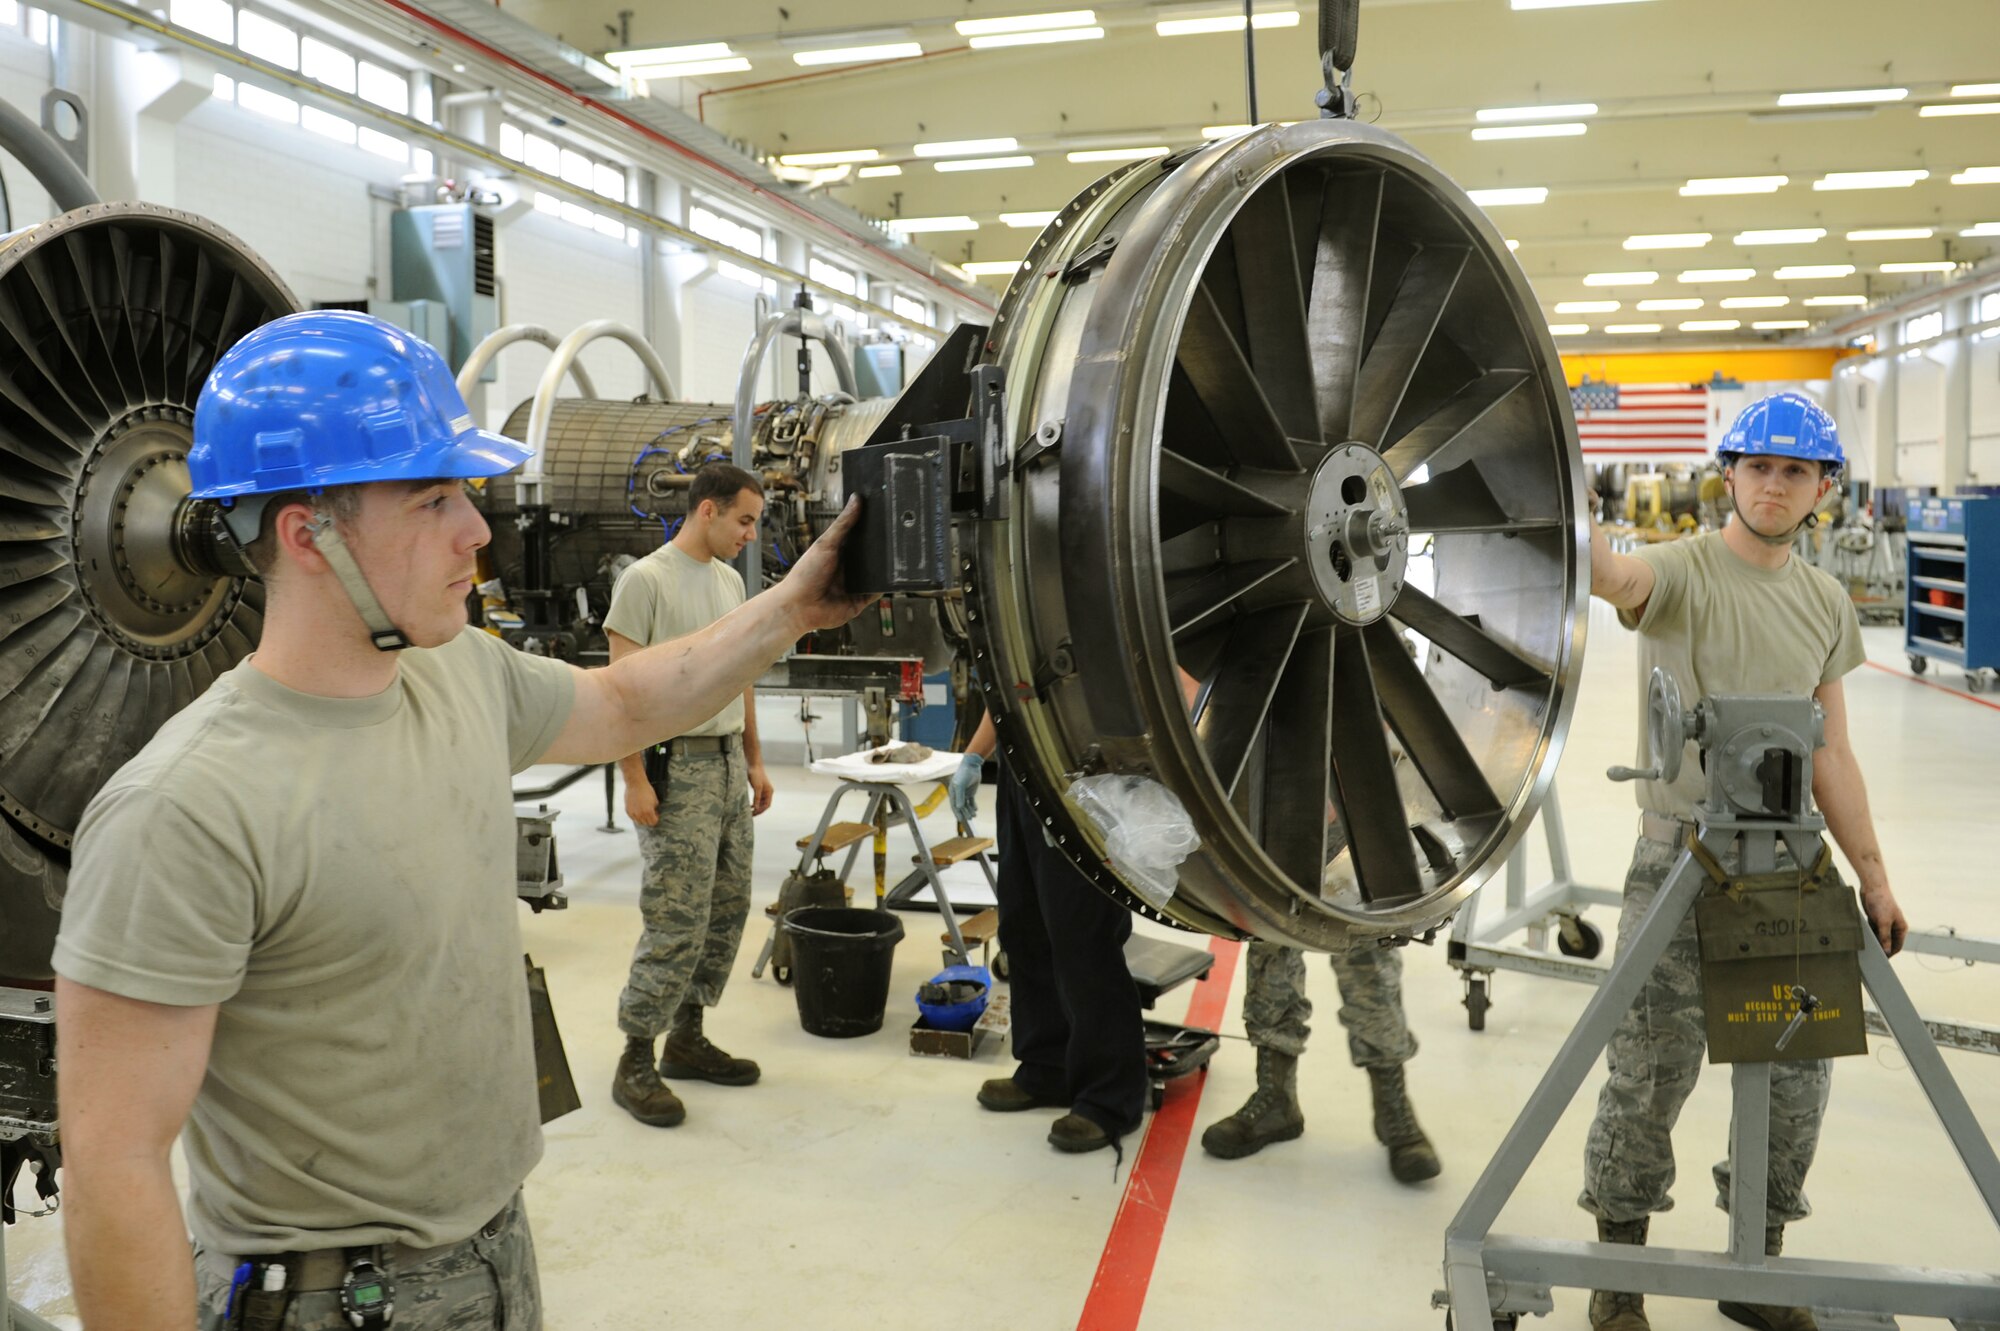 SPANGDAHLEM AIR BASE, Germany – Senior Airman Willis Jenson, left, and Senior Airman Braden Duke, 52nd Component Maintenance Squadron aerospace propulsion technicians, guide the front frame from of F-16 Fighting Falcon turbine to a disassembly stand during the removal of all moving parts of the engine at Bldg. 73 here April 30. Technicians replace these moving parts in a turbine every 4,000 flight hours as required by the service life extension program. CMS provides maintenance support to the 52nd Fighter Wing, the 31st FW at Aviano AB, Italy, and all U.S. F-16 units powered by F-110 engines in the European theater and deployed locations. (U.S. Air Force photo by Senior Airman Christopher Toon/Released)
